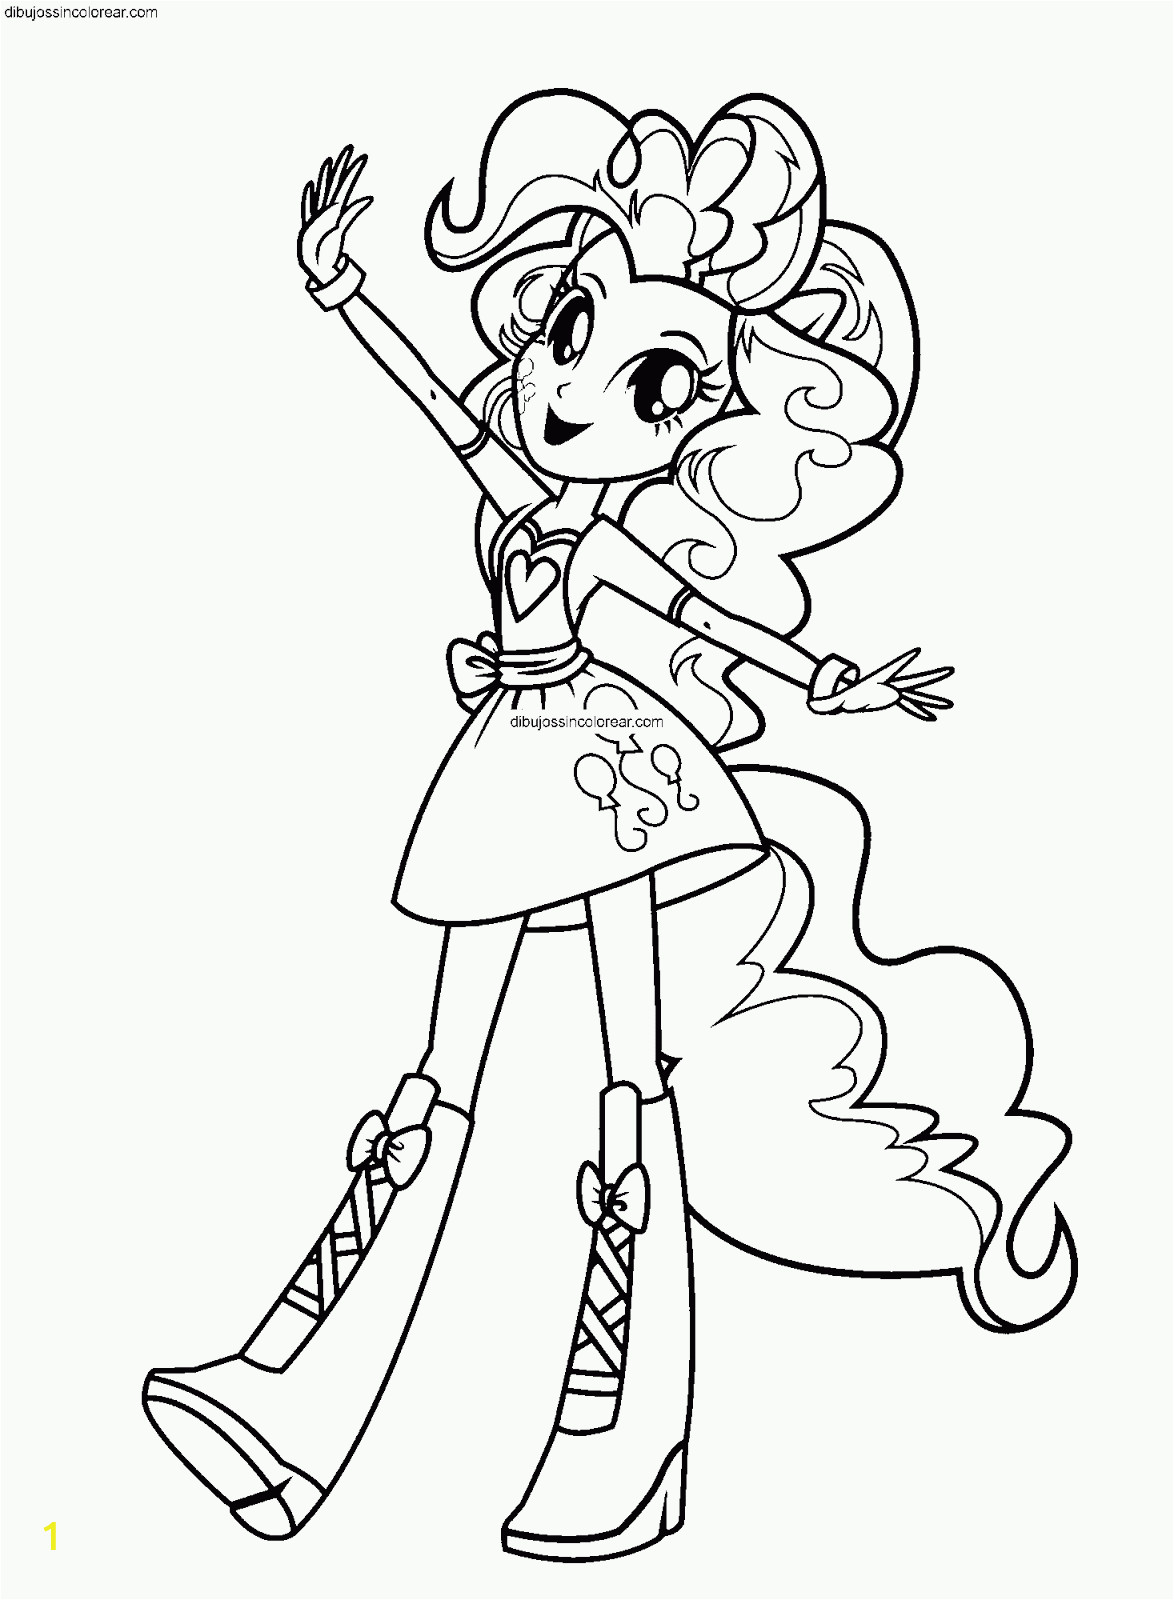 Pinkie Pie Equestria Girl Coloring Pages 25 Best Equestria Girls Pinkie Pie Coloring Pages Home